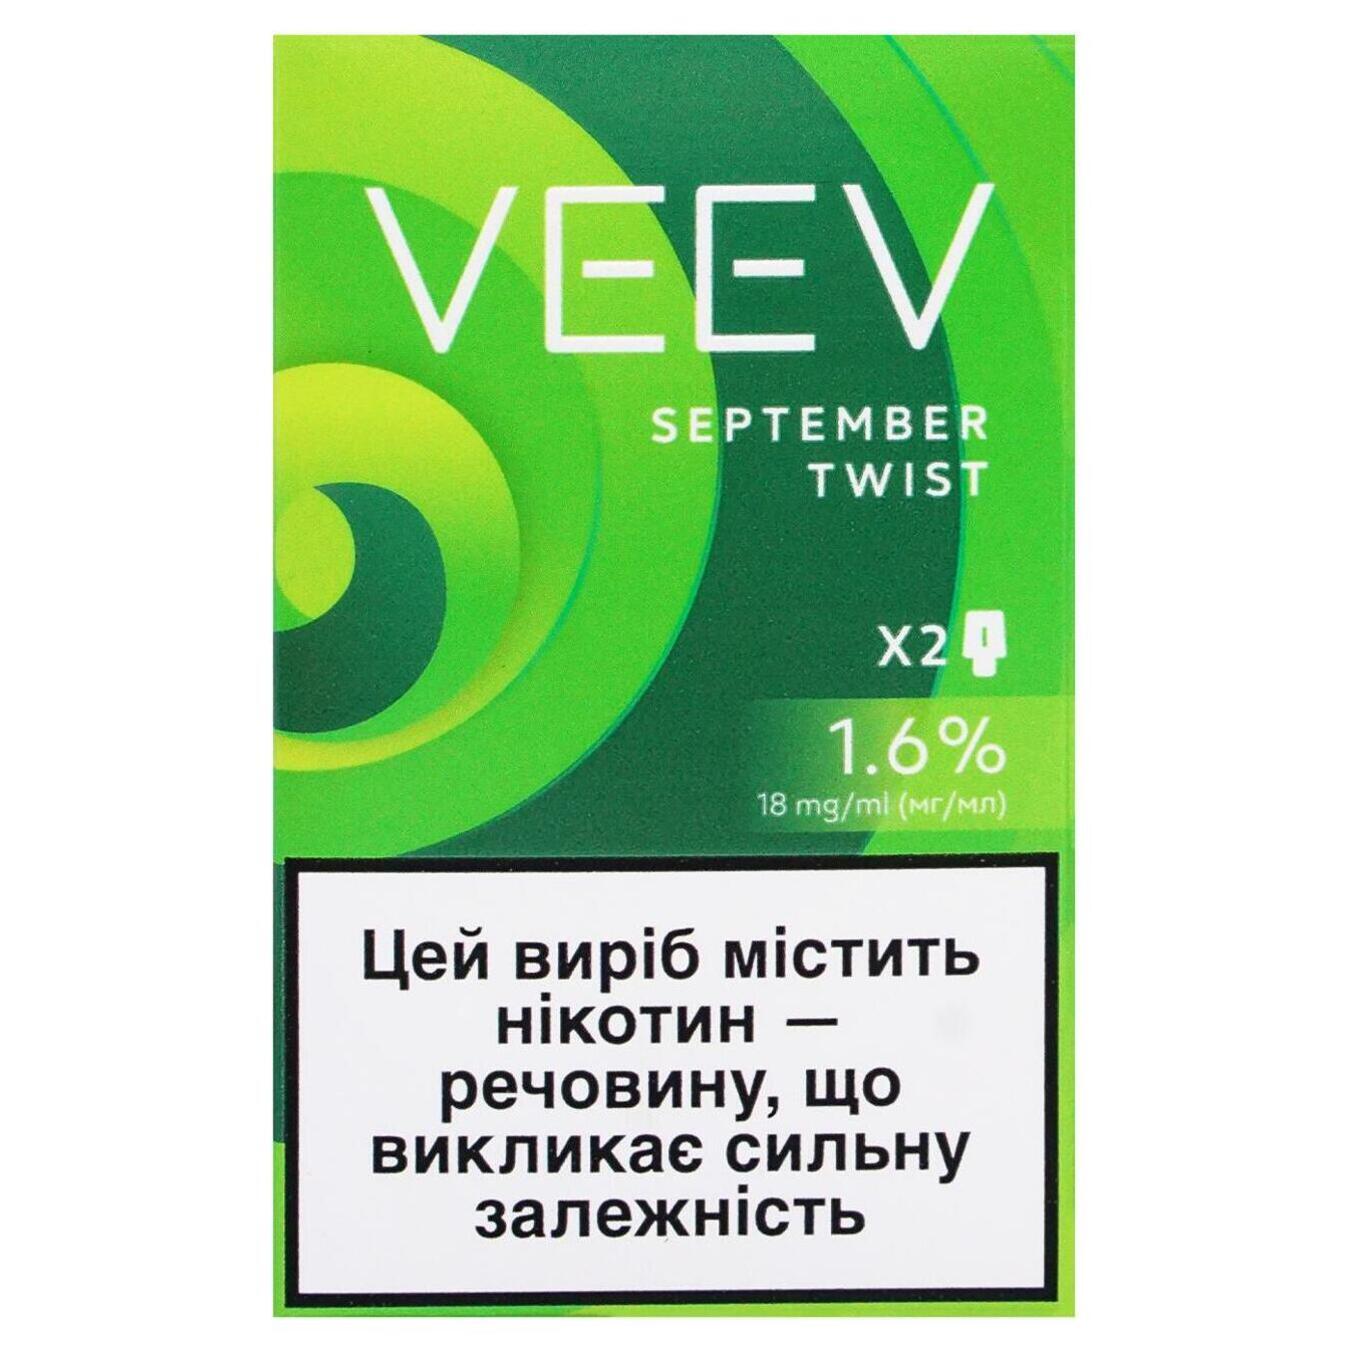 Cartridge VEEV September Twist 1.6% (price shown without excise duty)